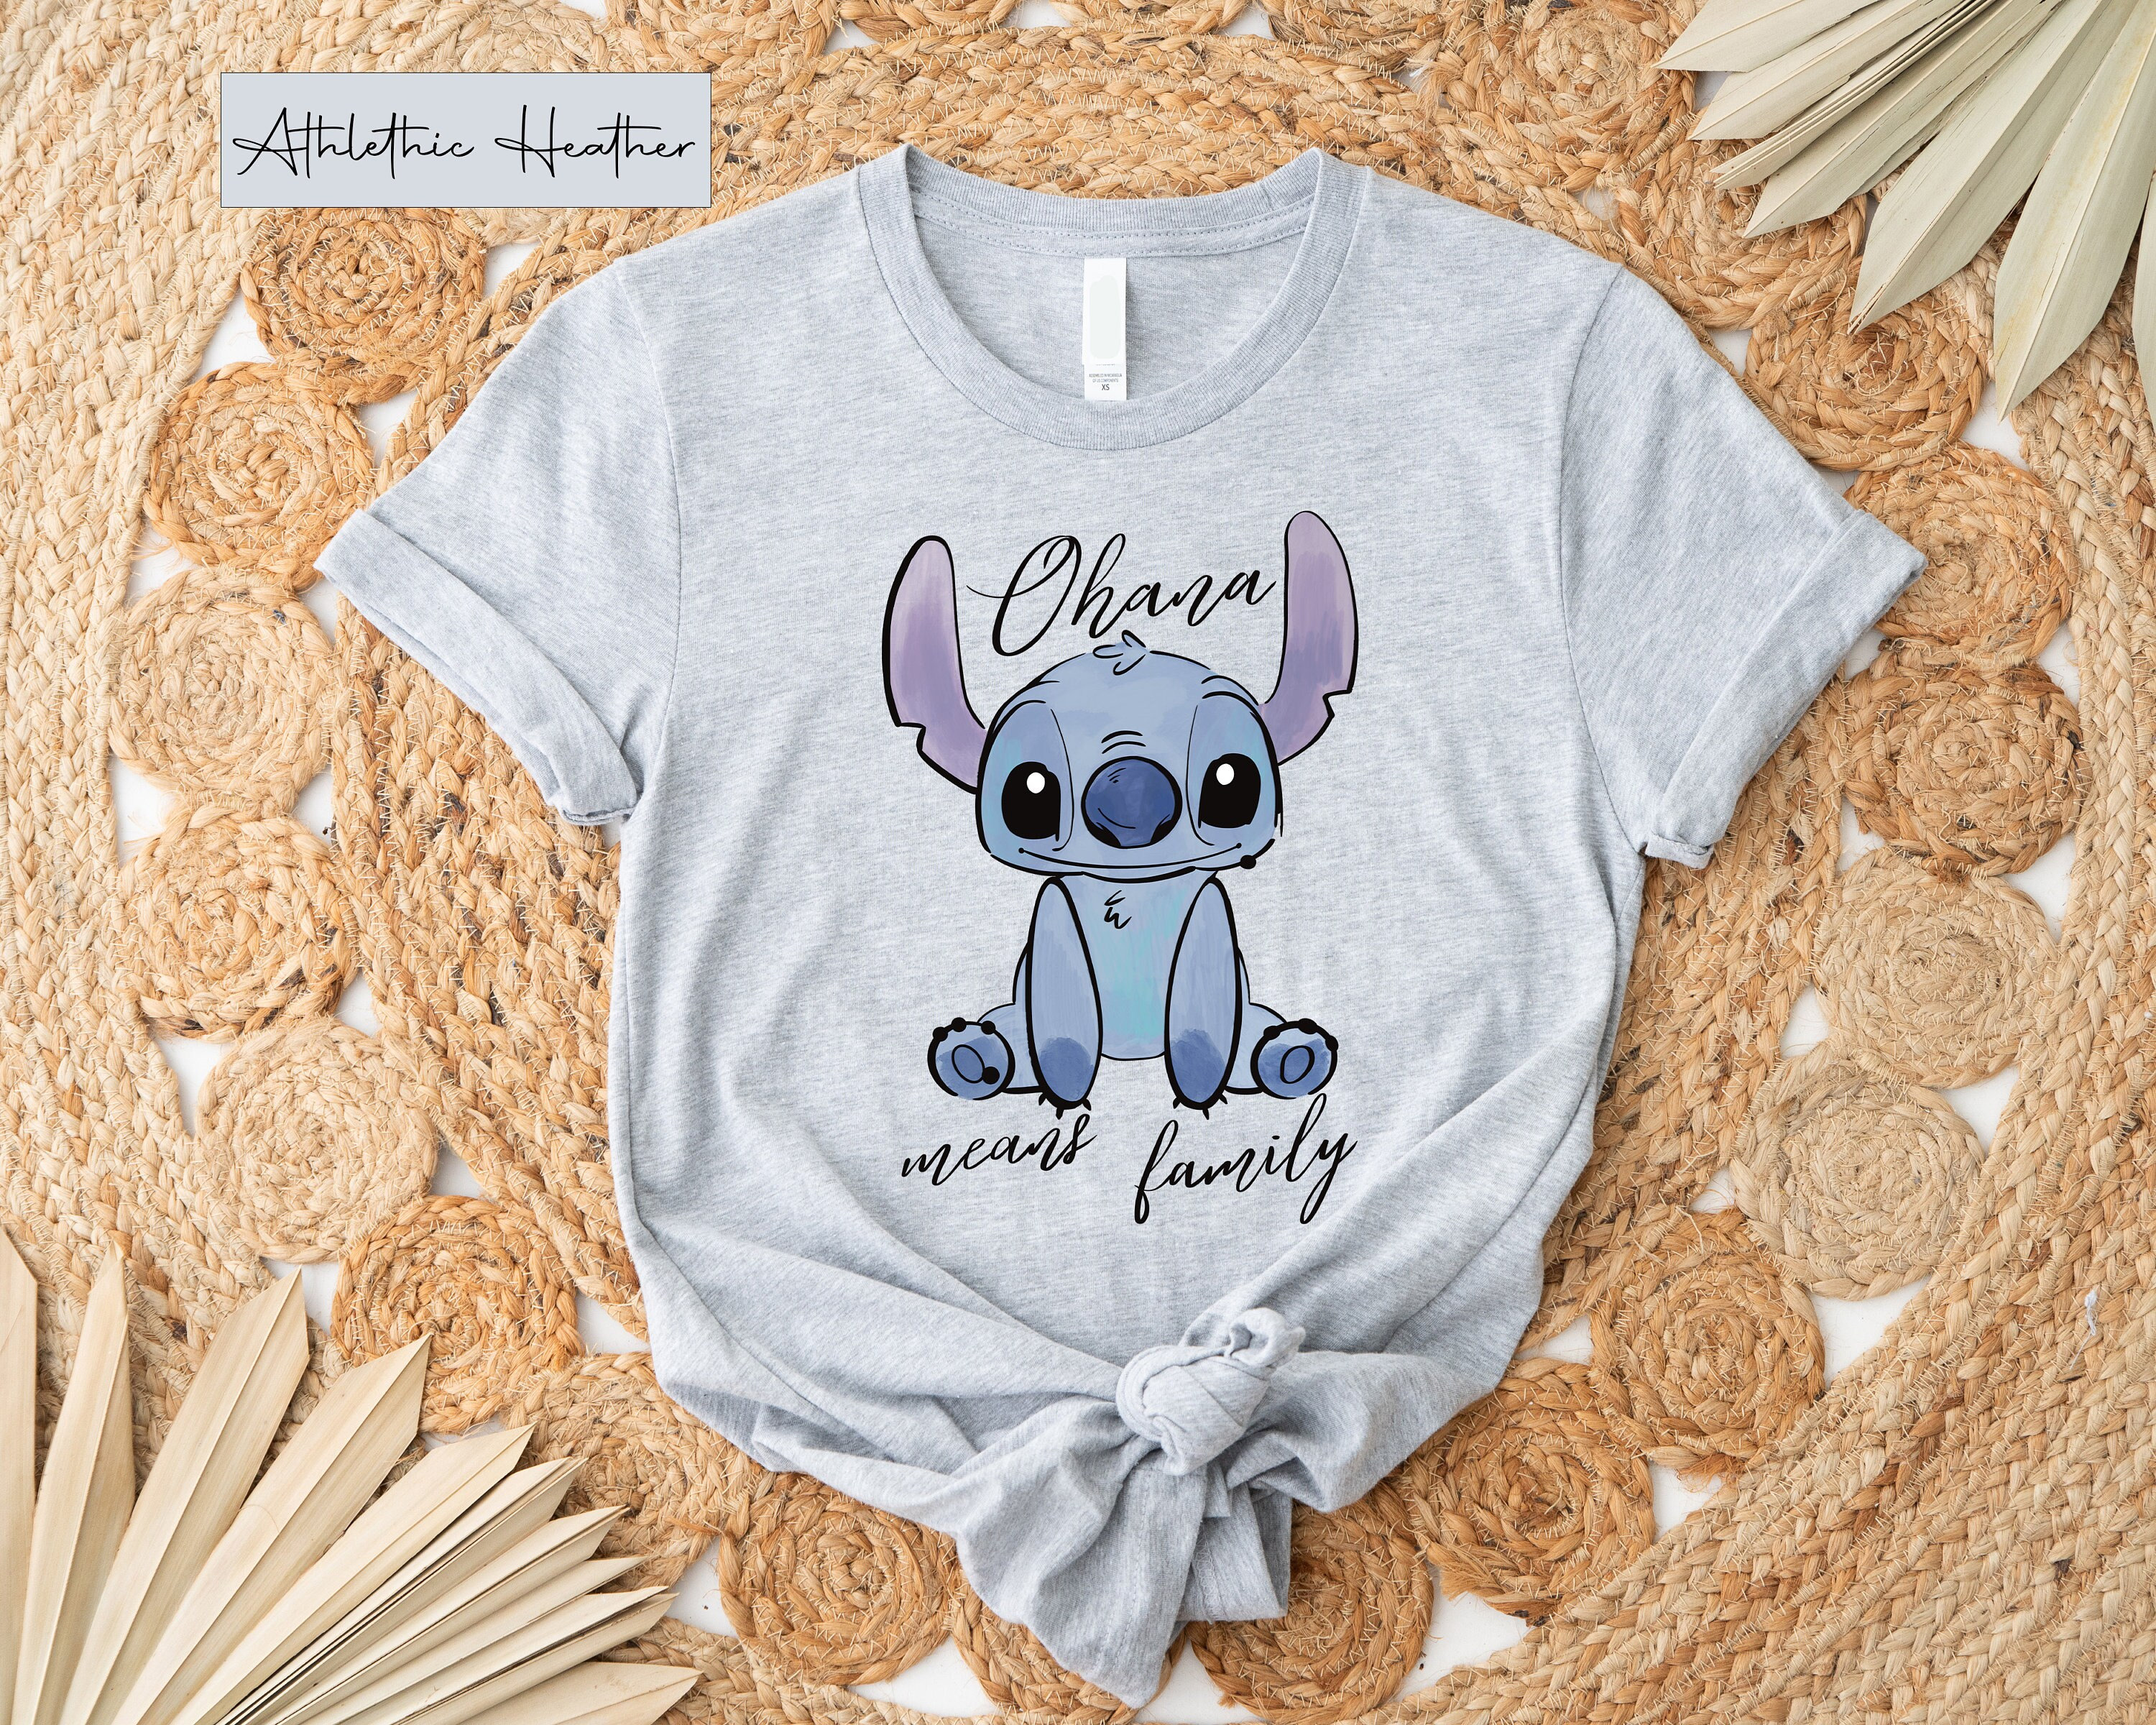 ZWYQWN Stitch Gifts Ohana Means Family Ring Stitch Lover Gift Birthday Gifts for Women Friends Stitch Fans Gifts